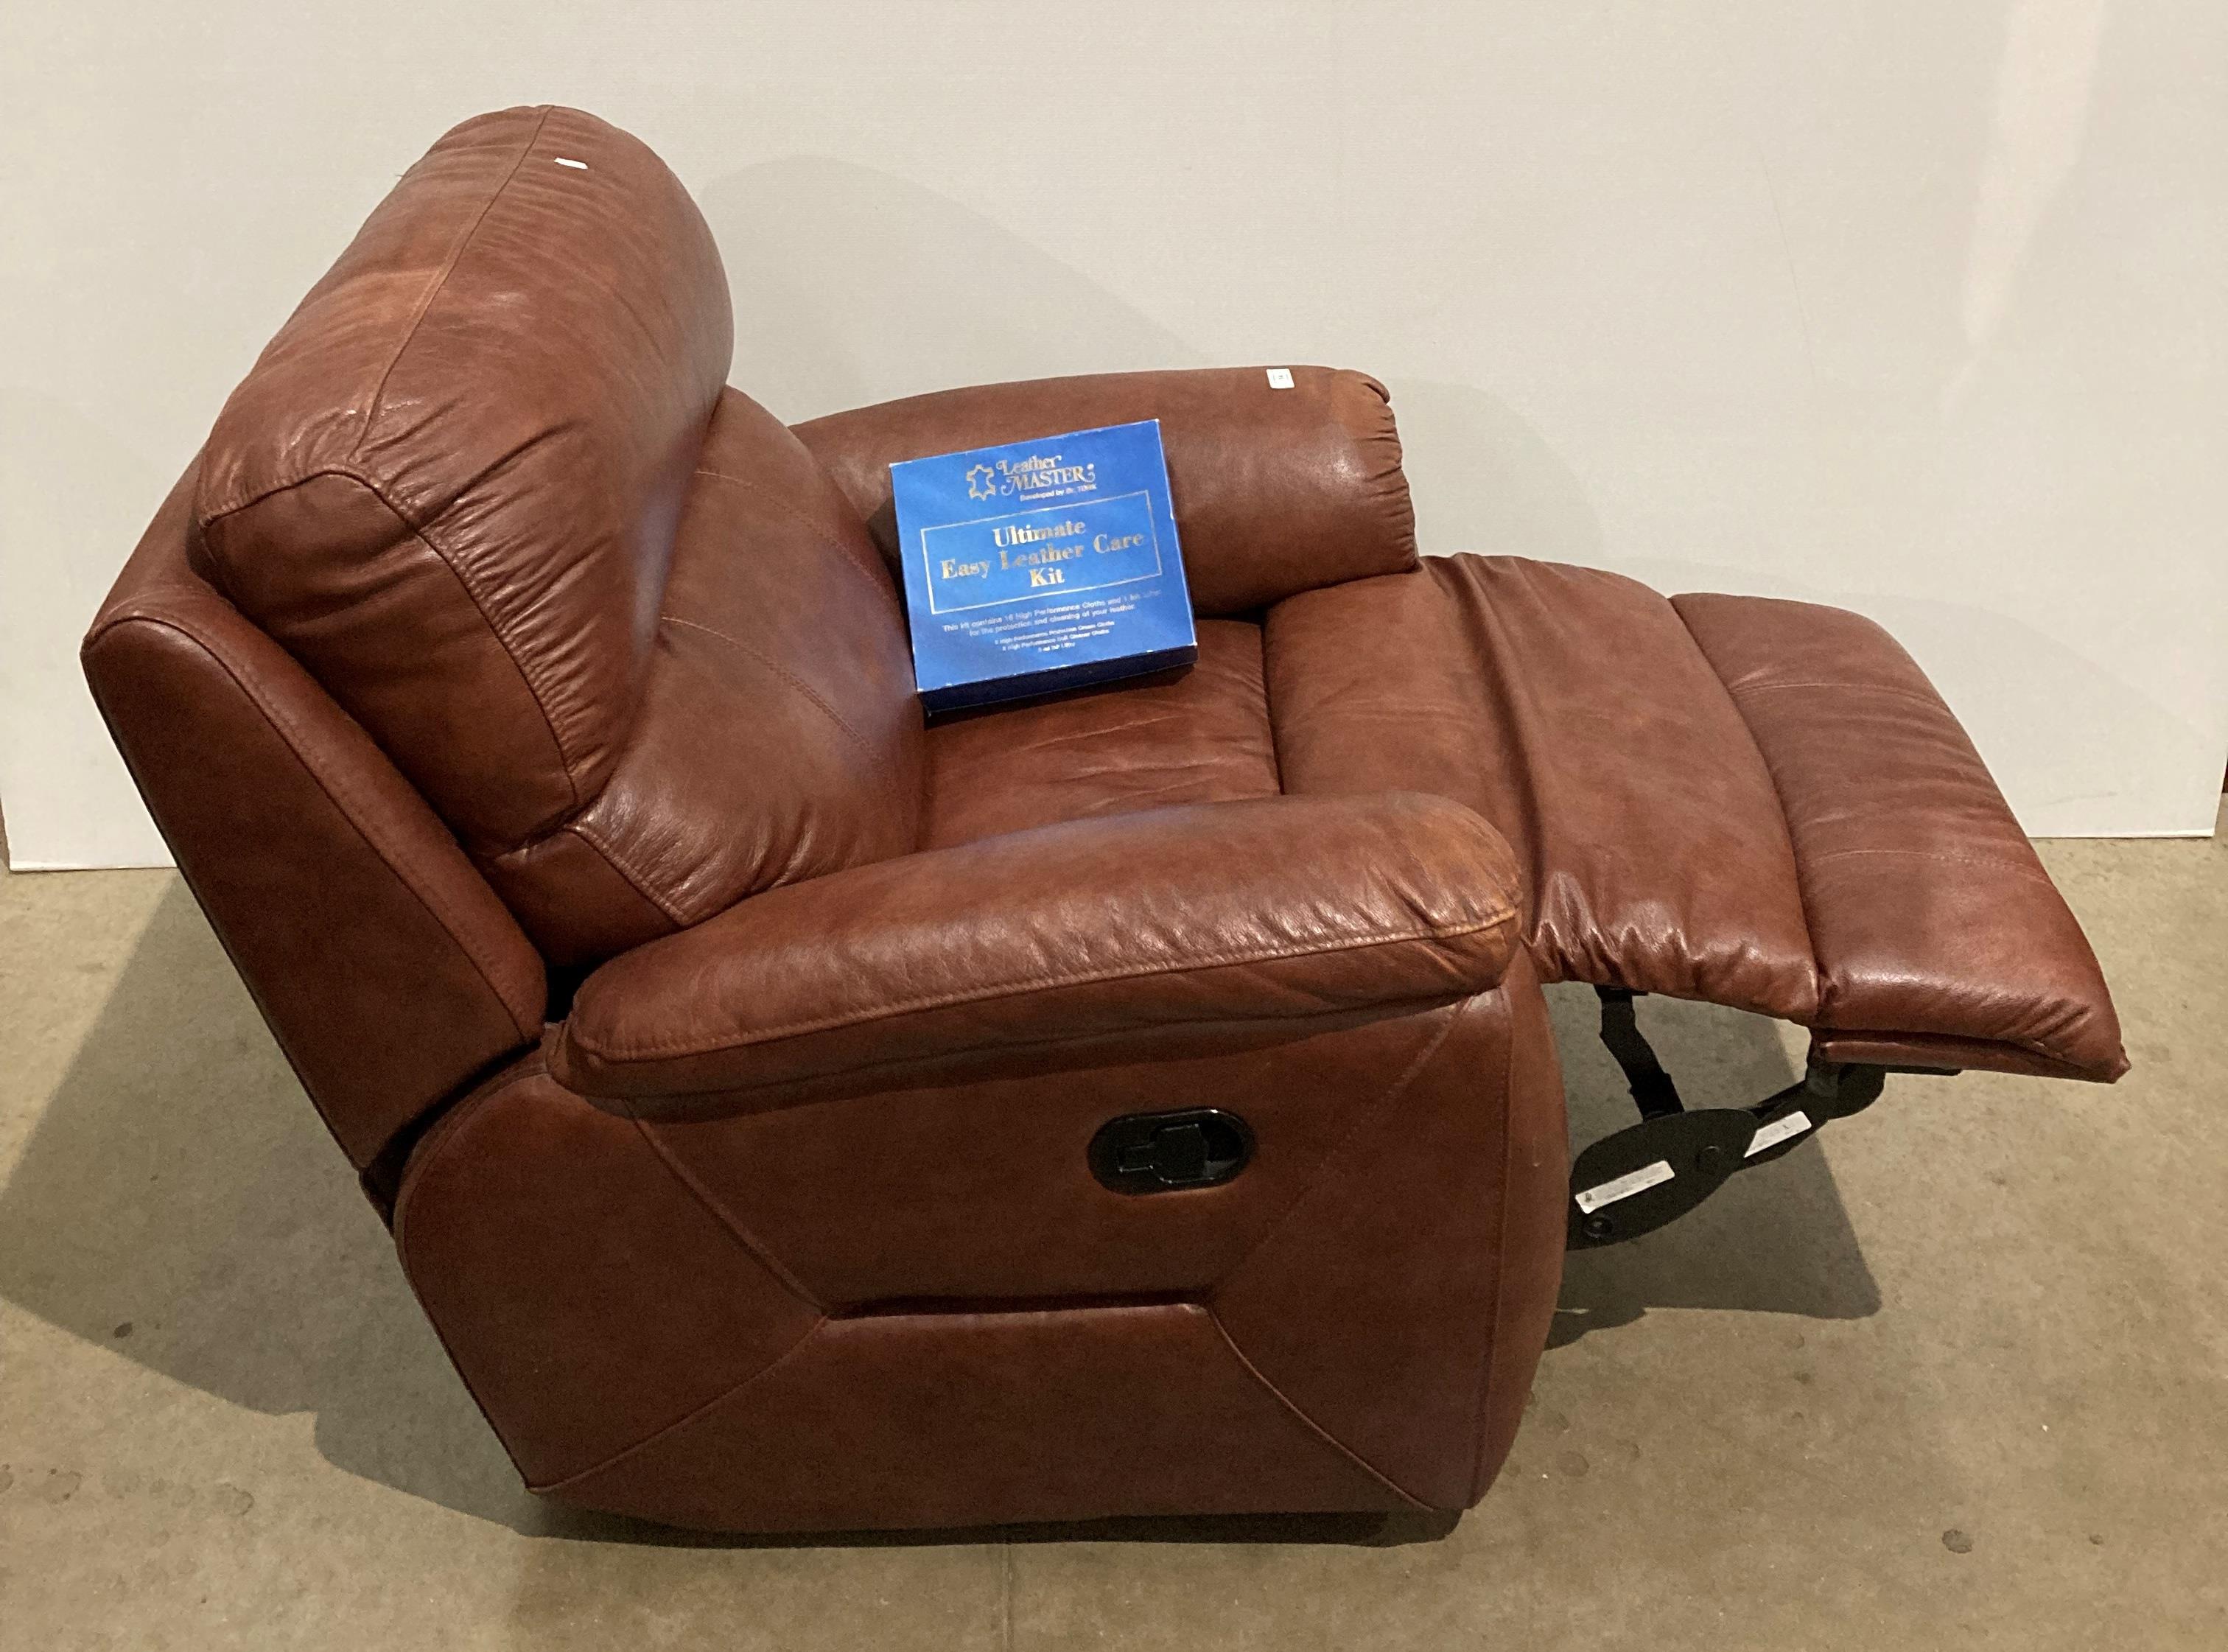 Brown leather manual reclining armchair (Saleroom location: Kit) - Image 2 of 2